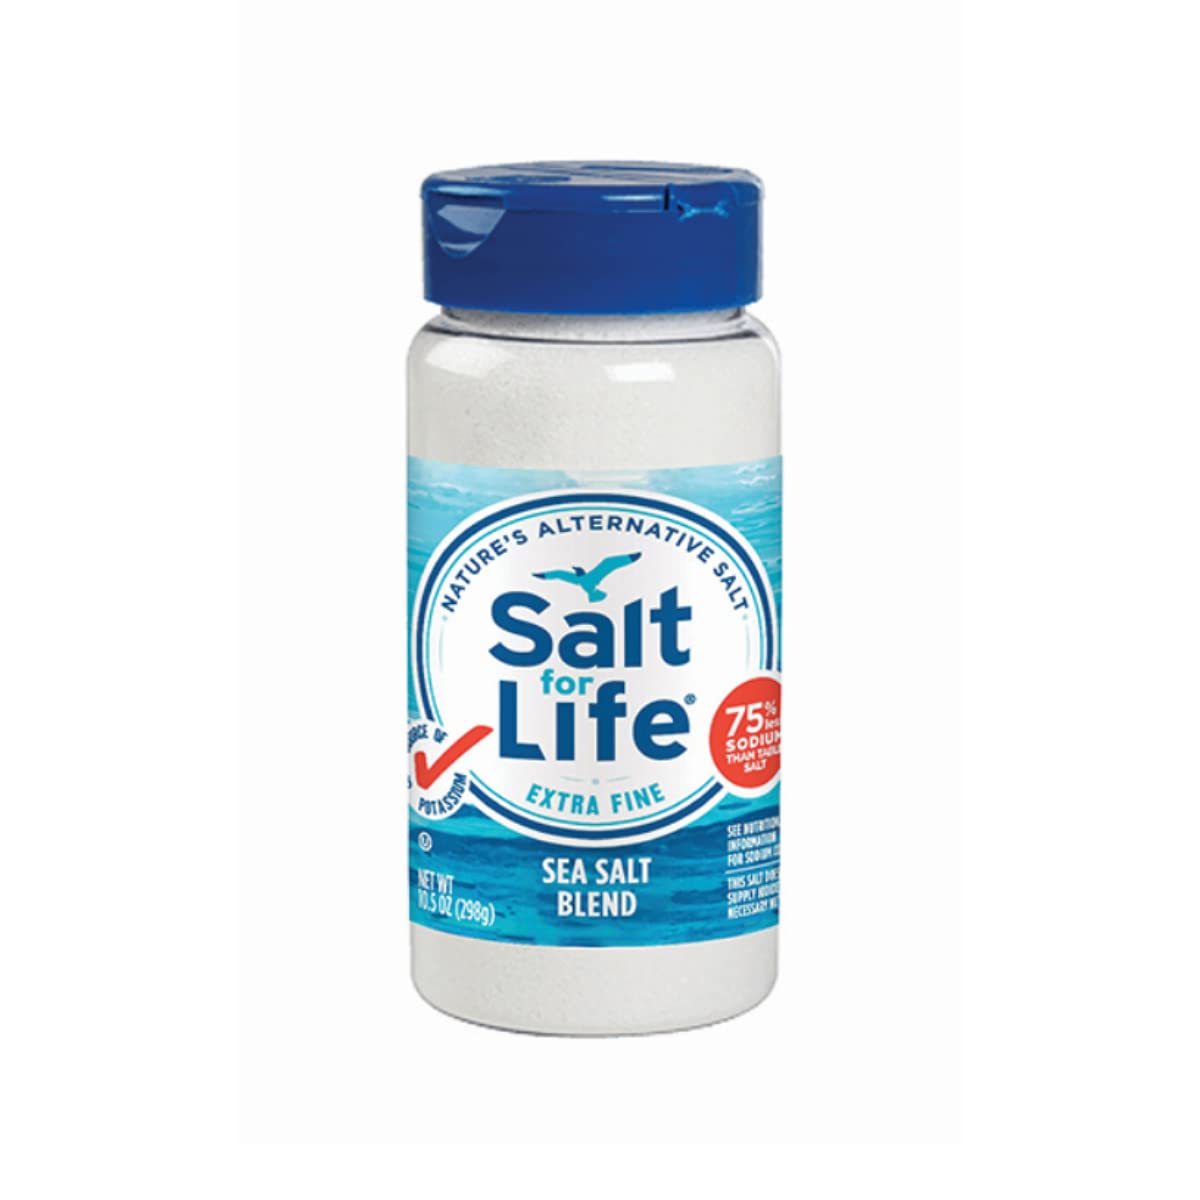 Low Sodium Salt Substitutes - Are They Safe? - The Wellness Corner